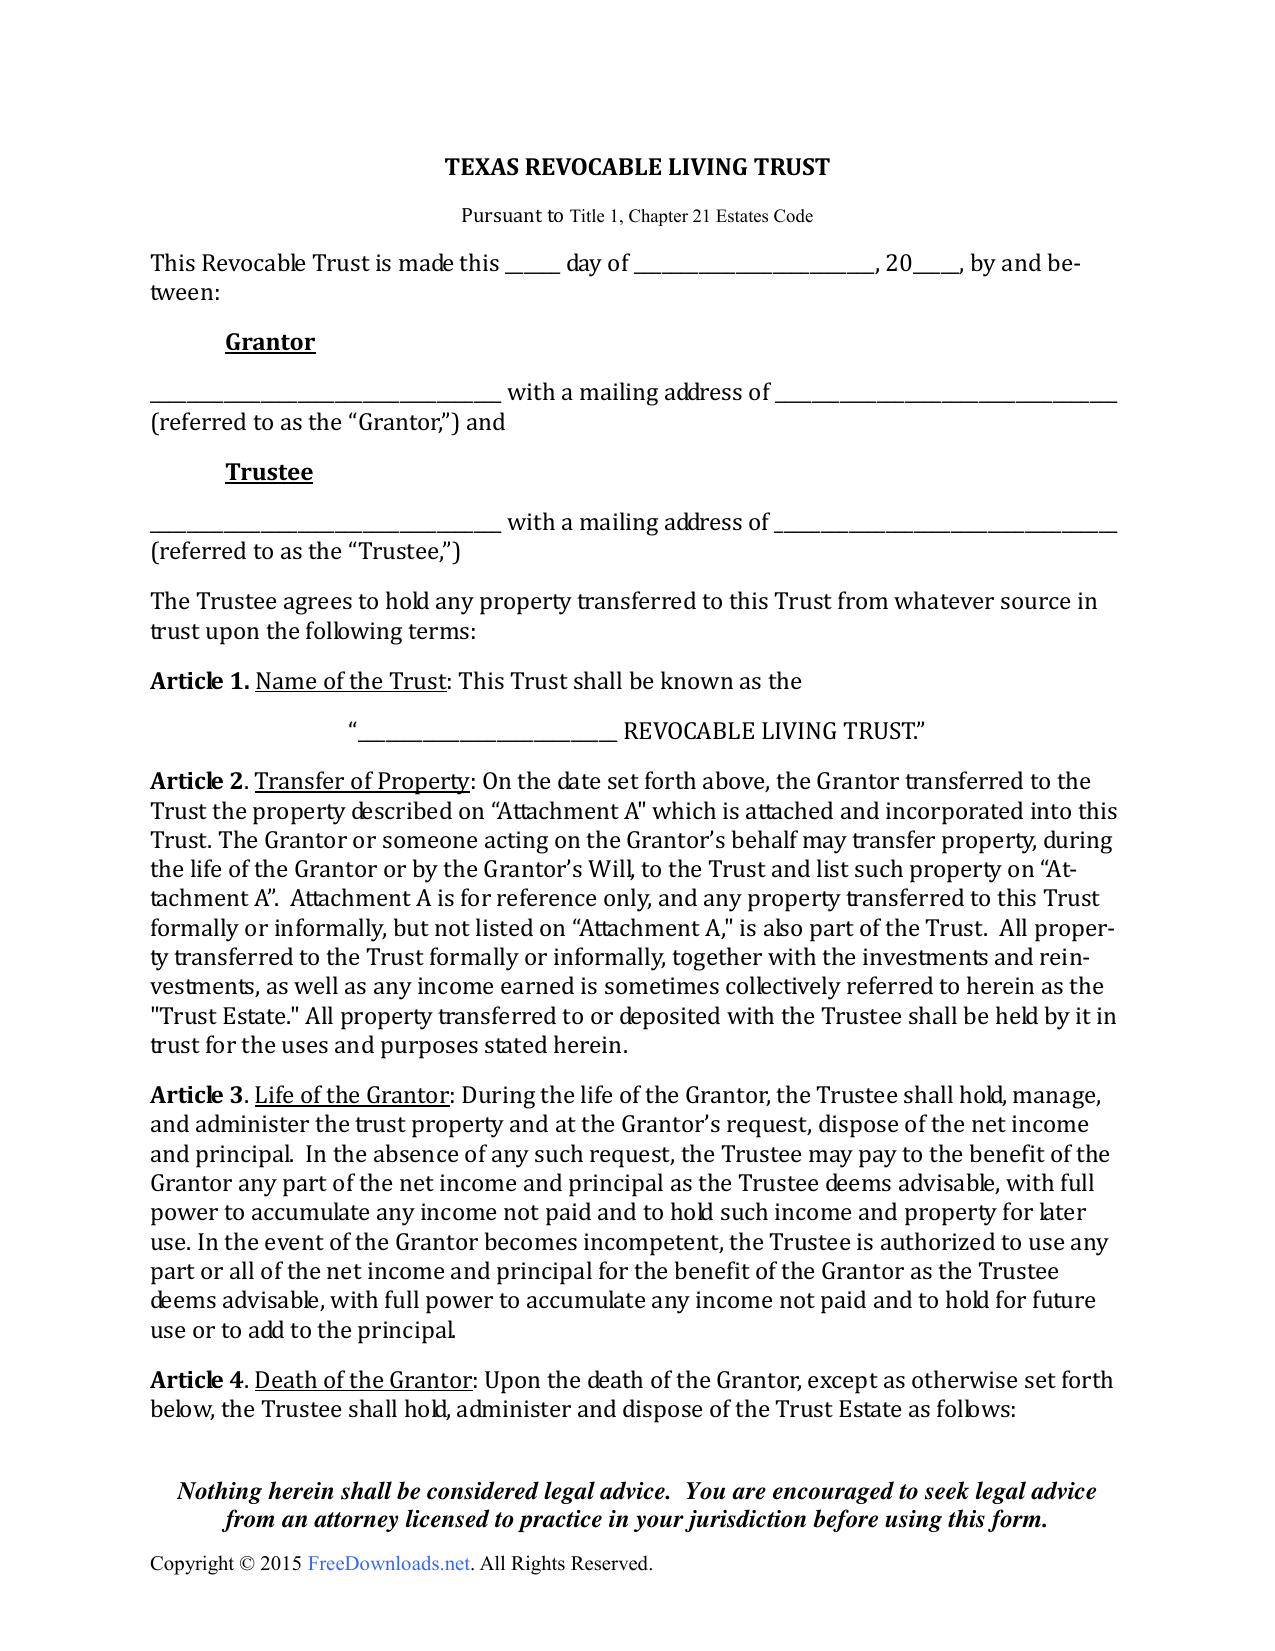 download-texas-revocable-living-trust-form-pdf-rtf-word